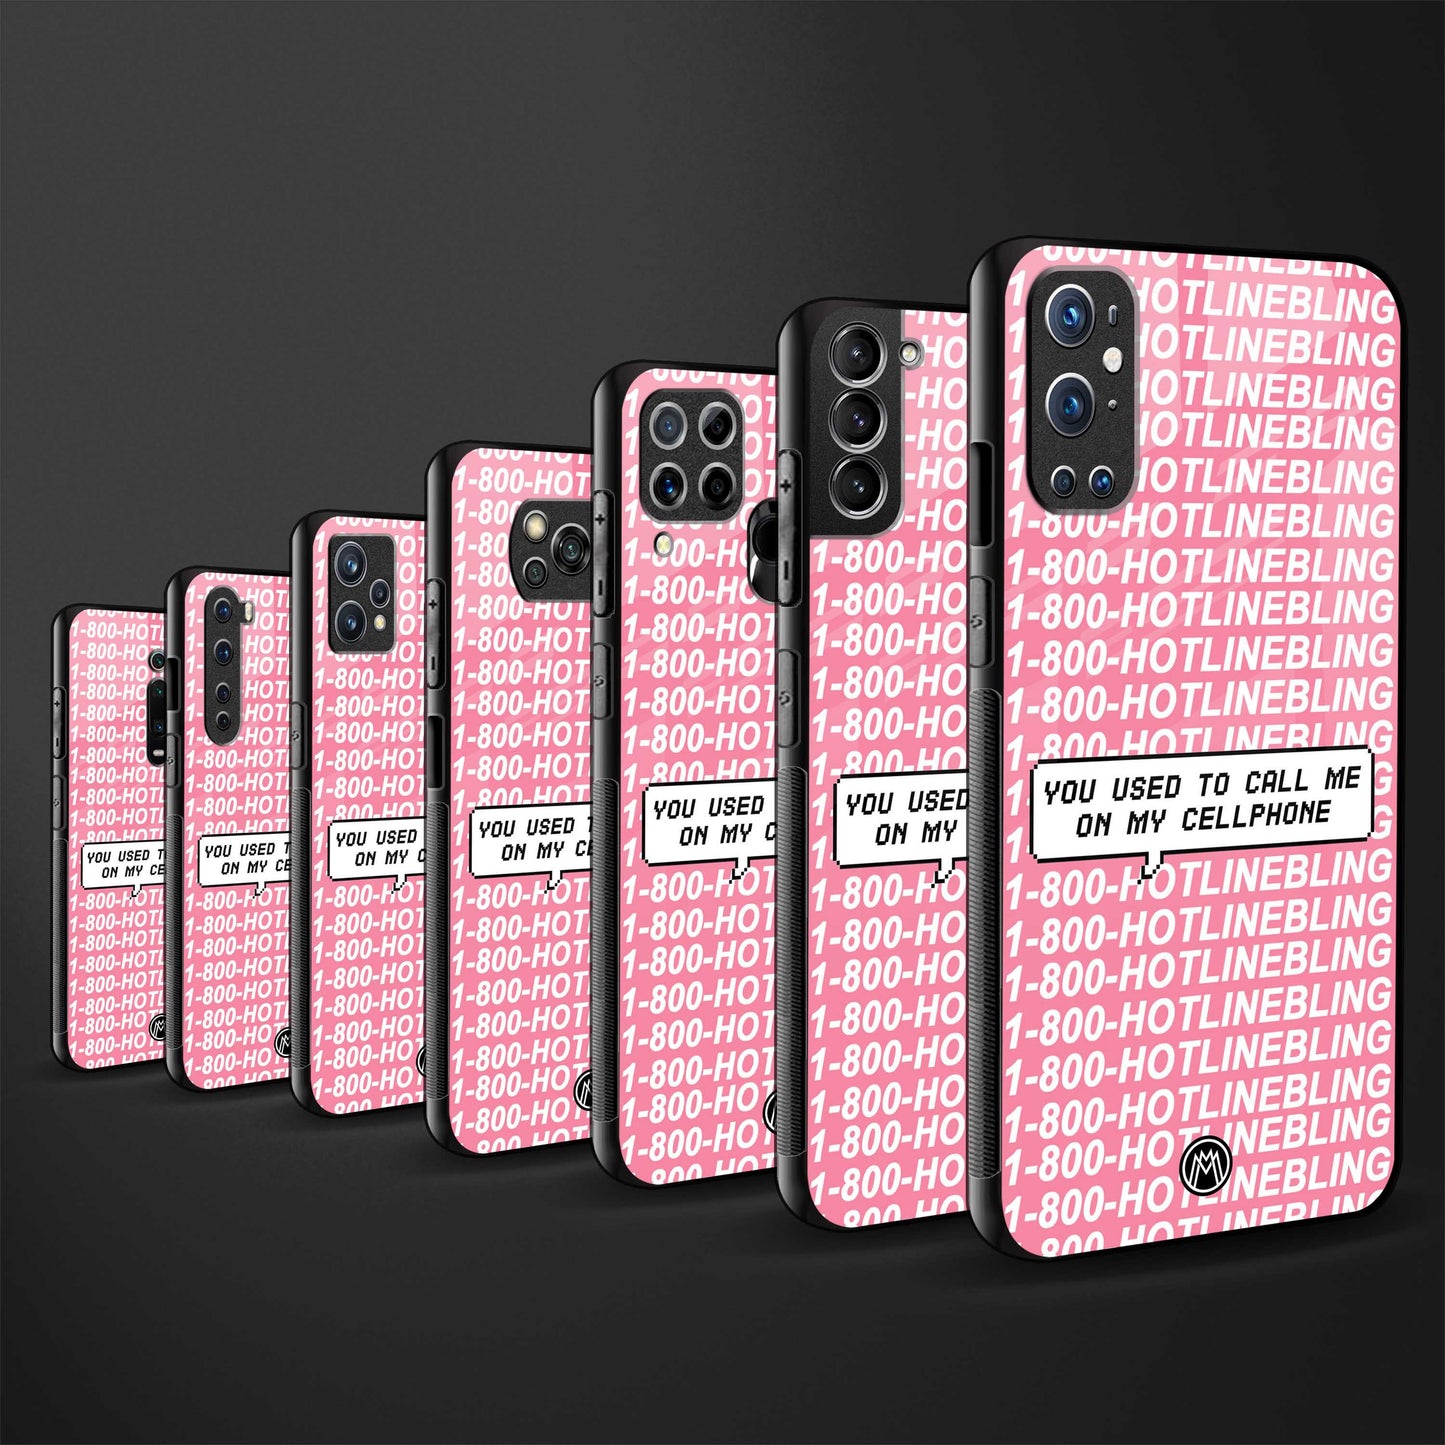 1800 hotline bling phone cover for samsung galaxy a70 